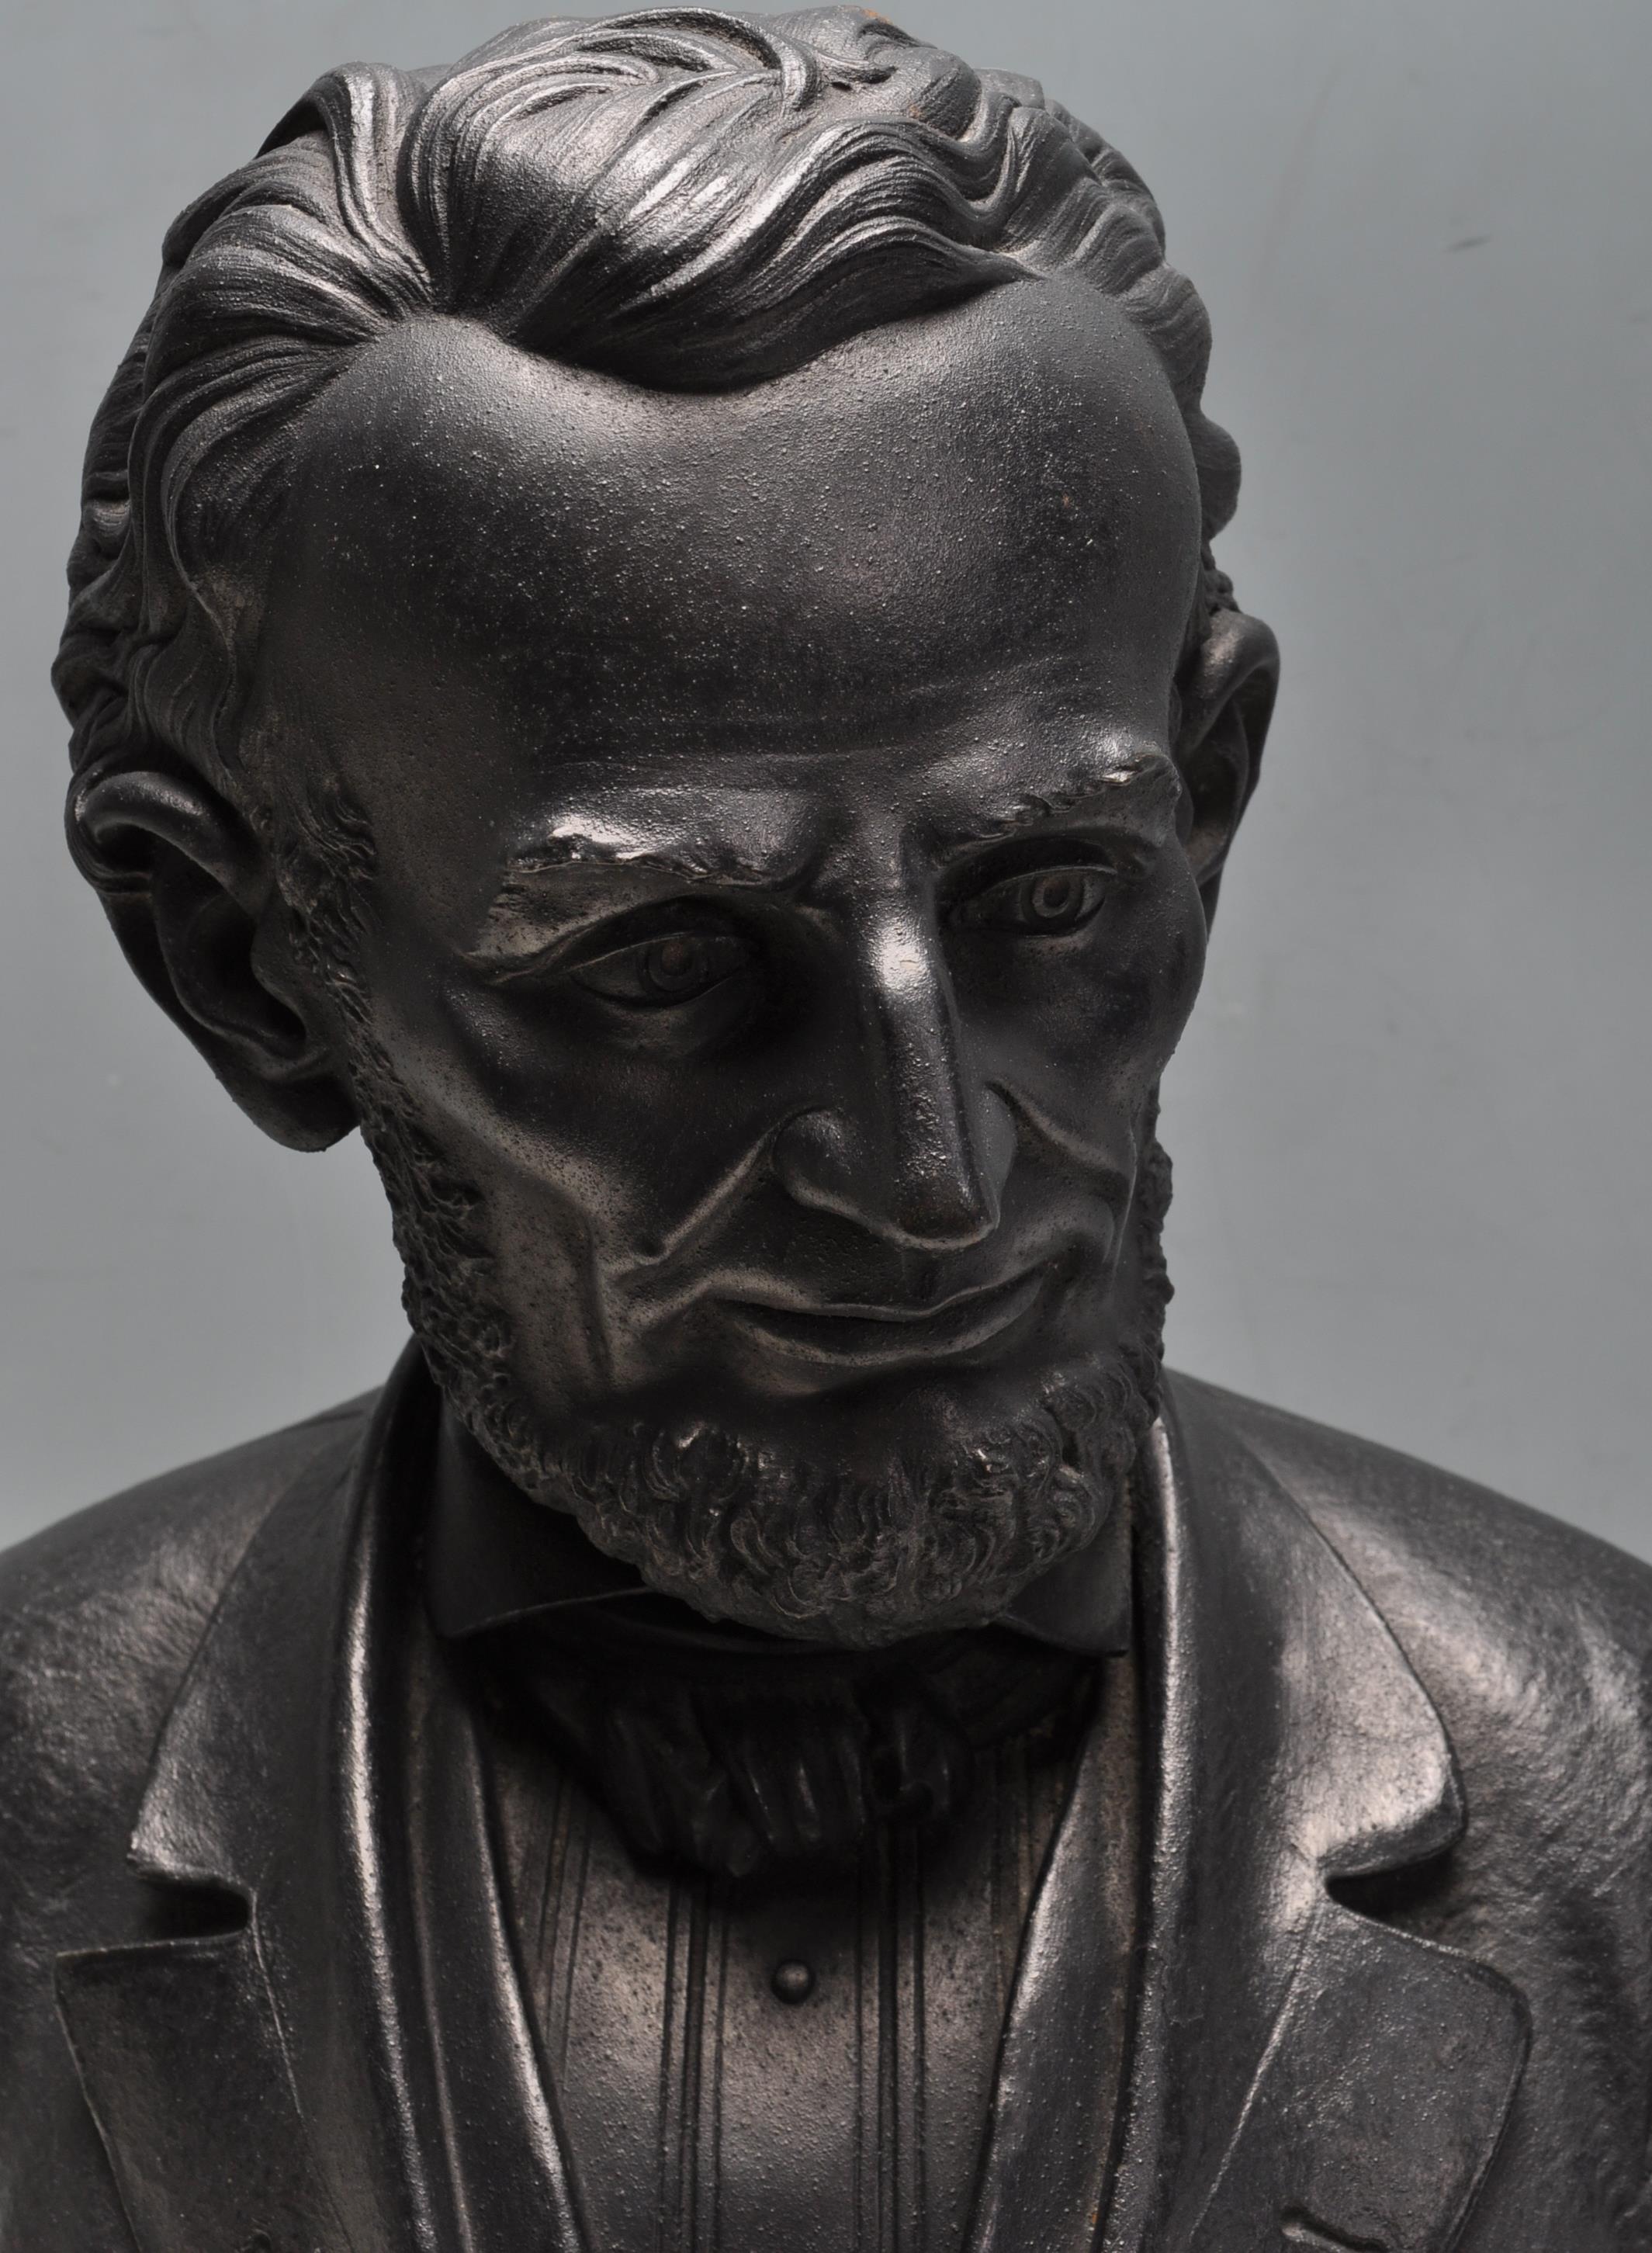 LATE 20TH CENTURY CAST METAL BUST OF ABRAHAM LINCOLN - Image 2 of 7